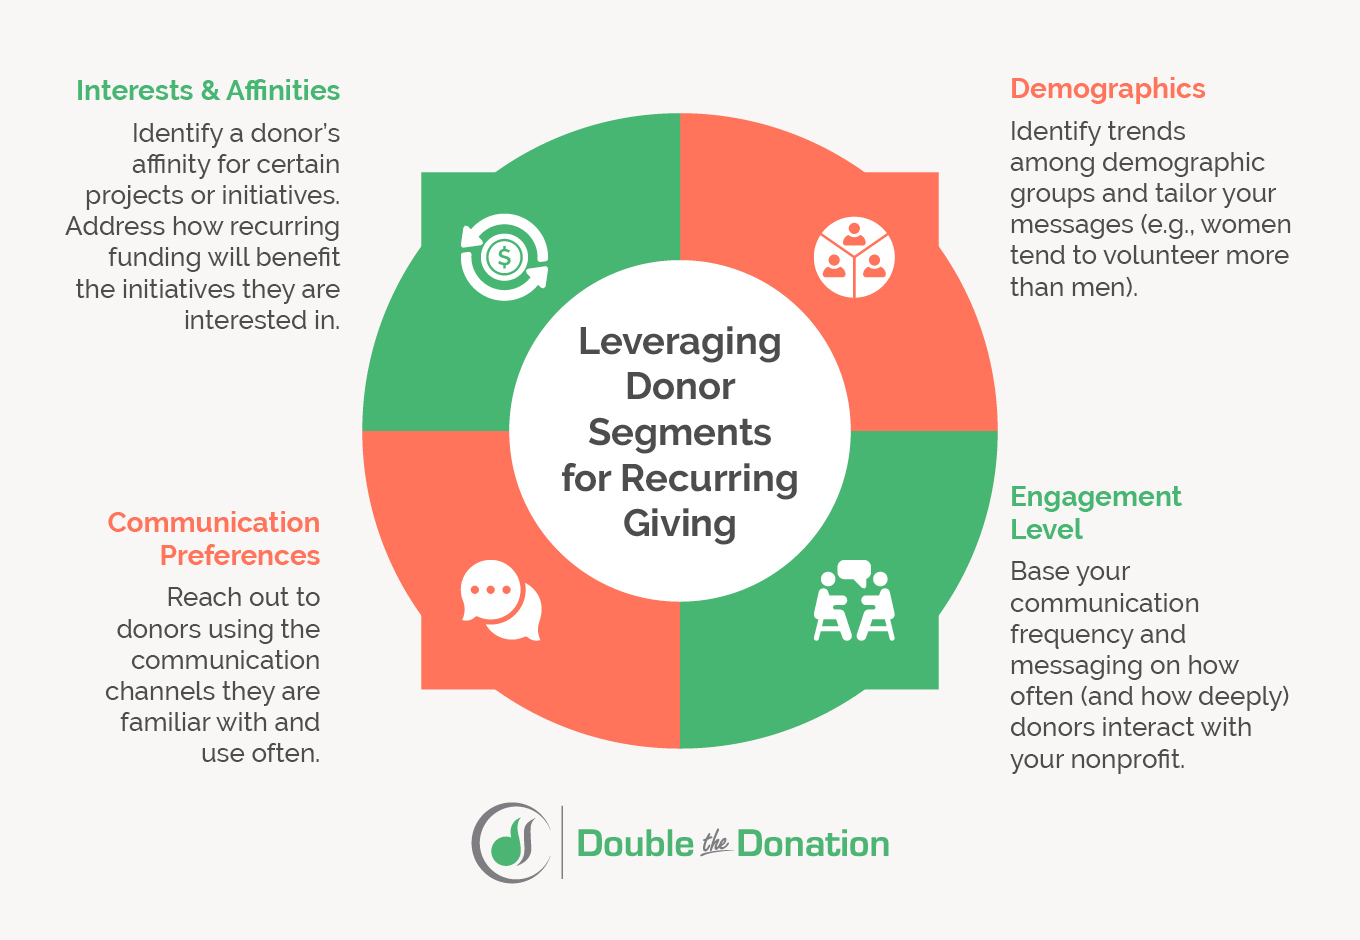 A list of donor segments that can be leveraged for recurring giving, which are detailed in the following text.